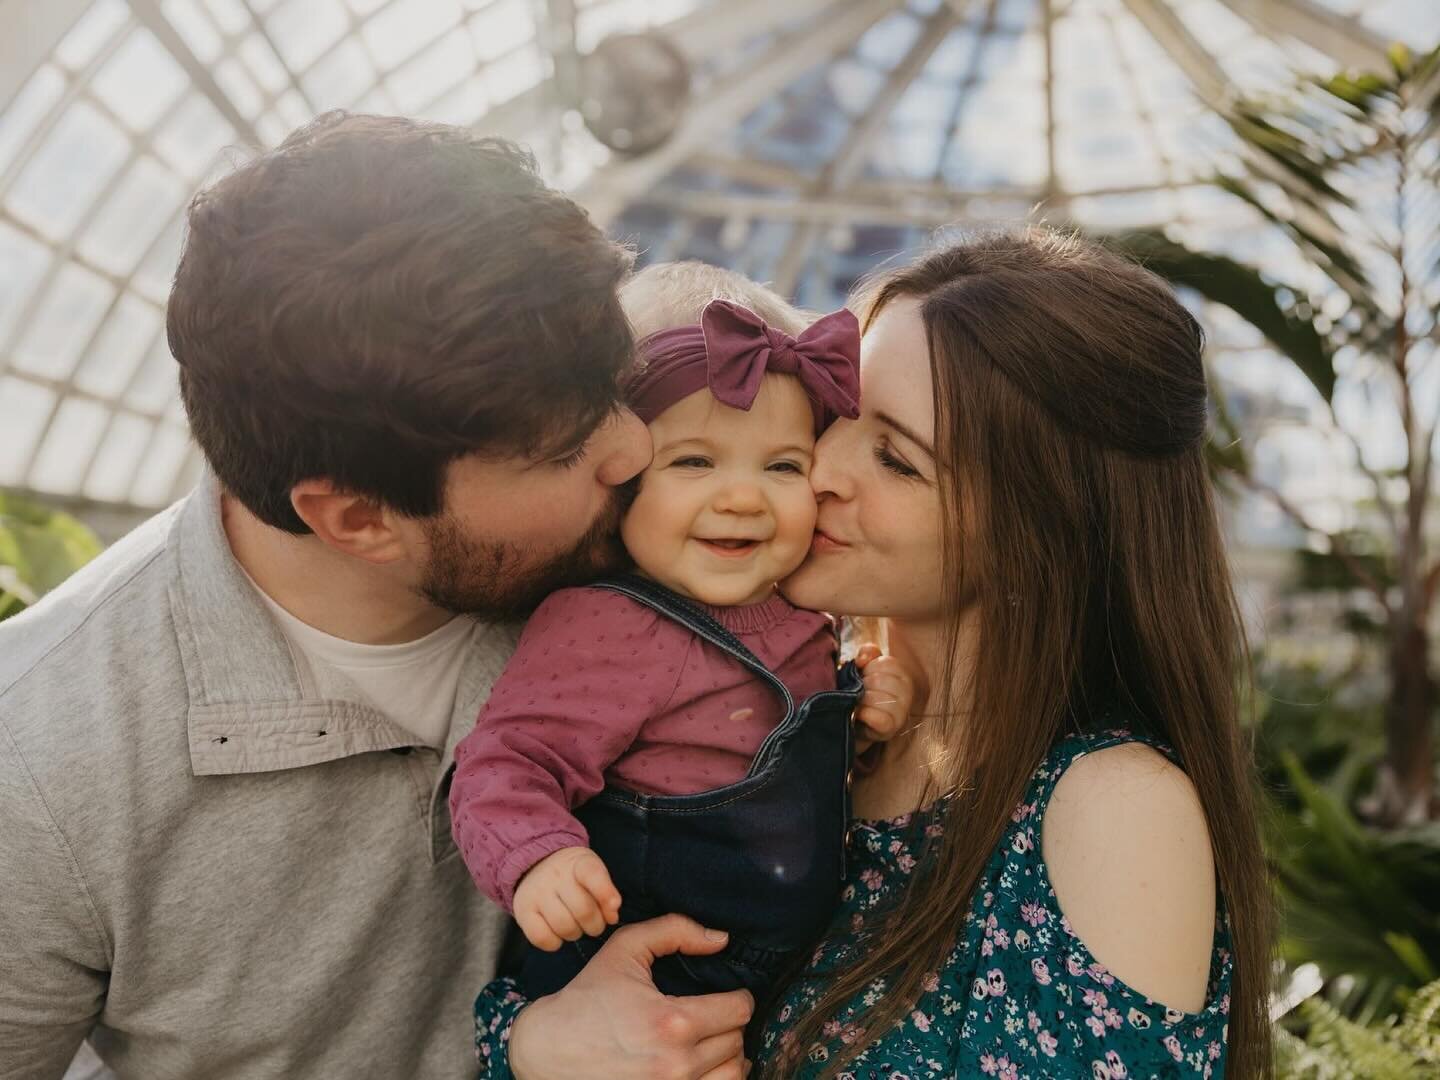 Hazel needed a spot on the feed for obvious reasons. This 1-year old session at The Frick was just so fun and just look at this beautiful family!

#lizegbertphoto #portrait_perfection #portraitphotography #familyphotographer #familyphotos #oneyearold